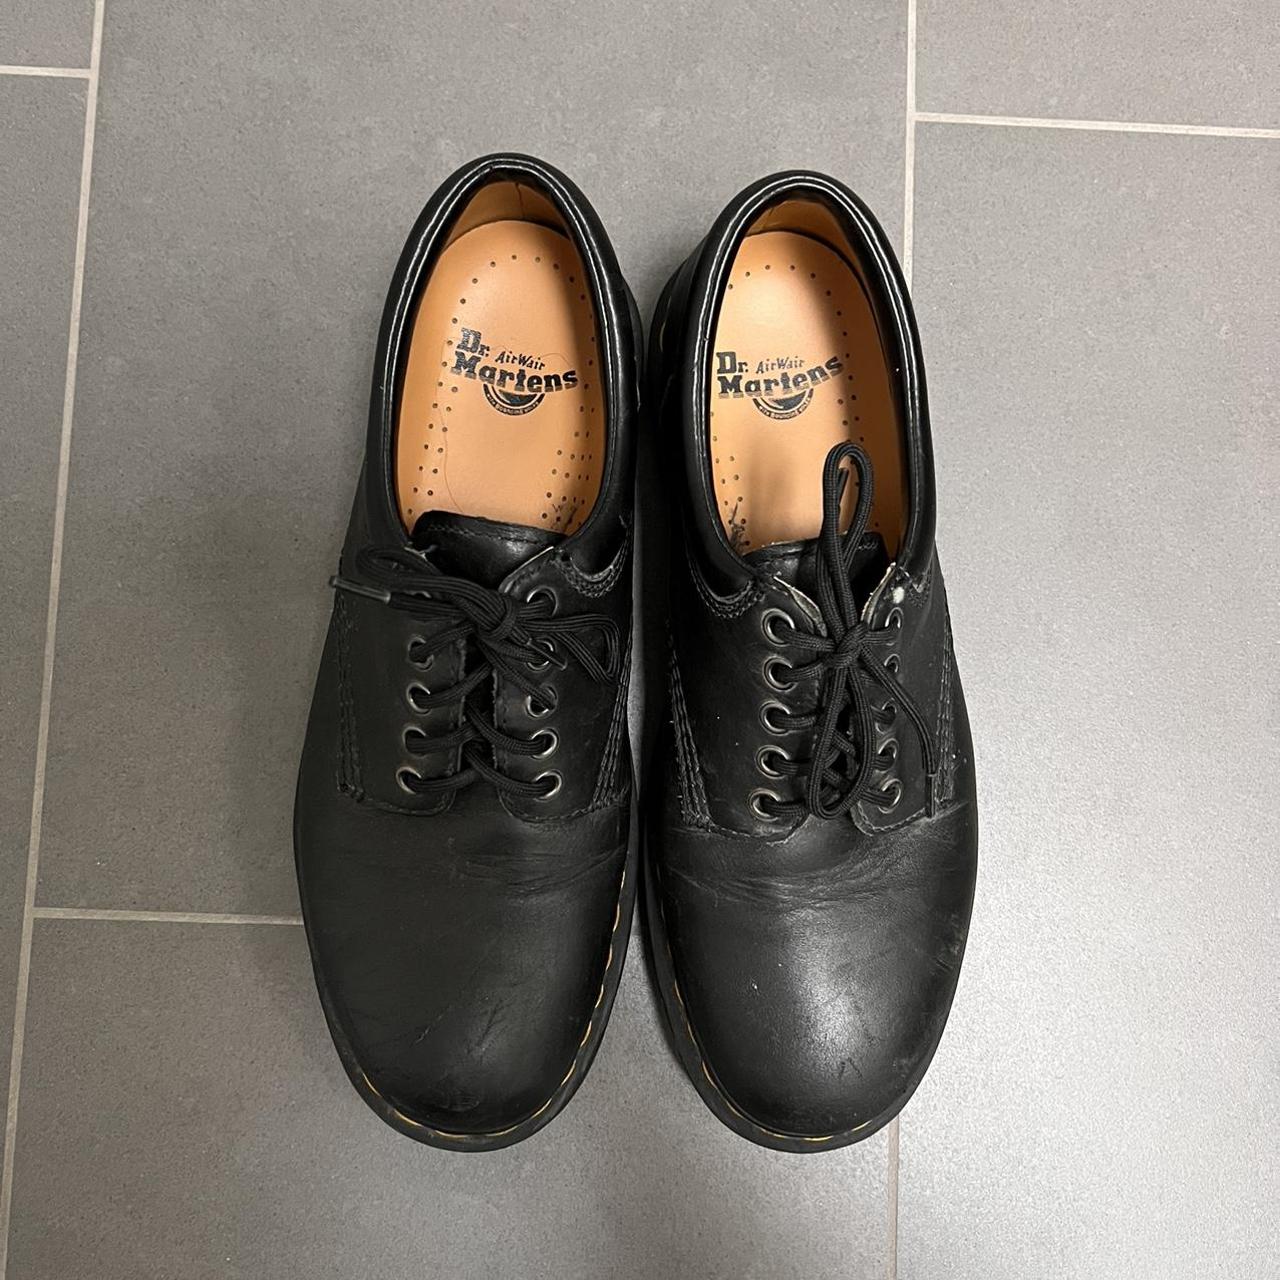 Dr. Martens Men's Black and Yellow Oxfords (3)